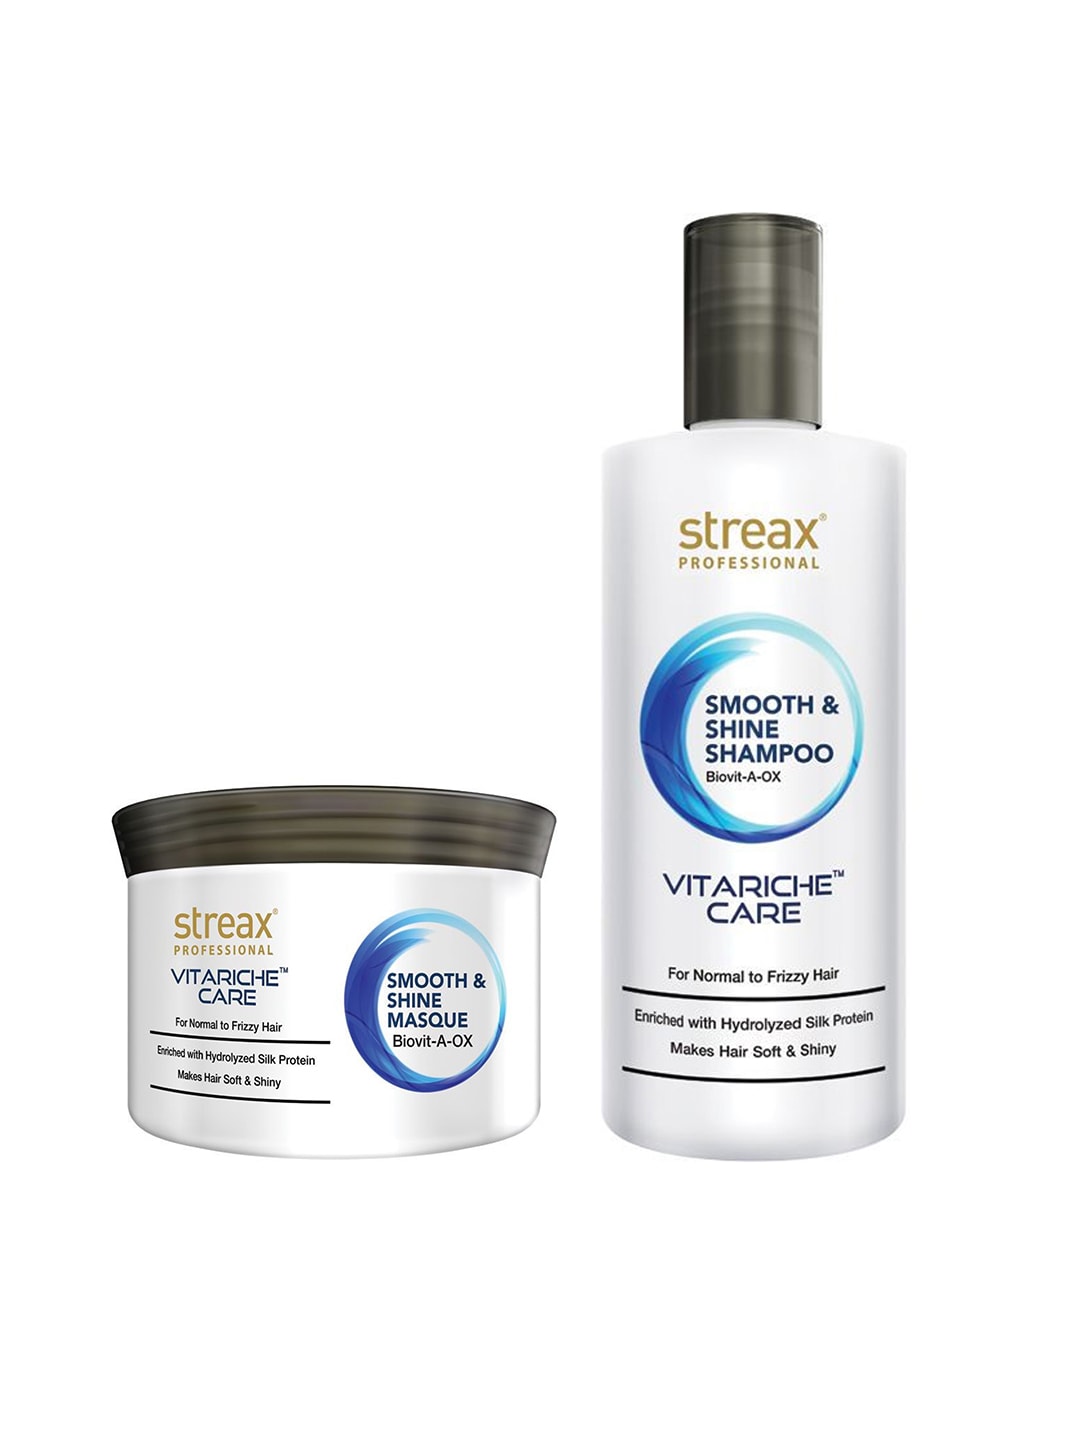 Streax Professional Set of Vitariche Care Smooth & Shine Shampoo & Hair Mask  Price in India, Full Specifications & Offers 